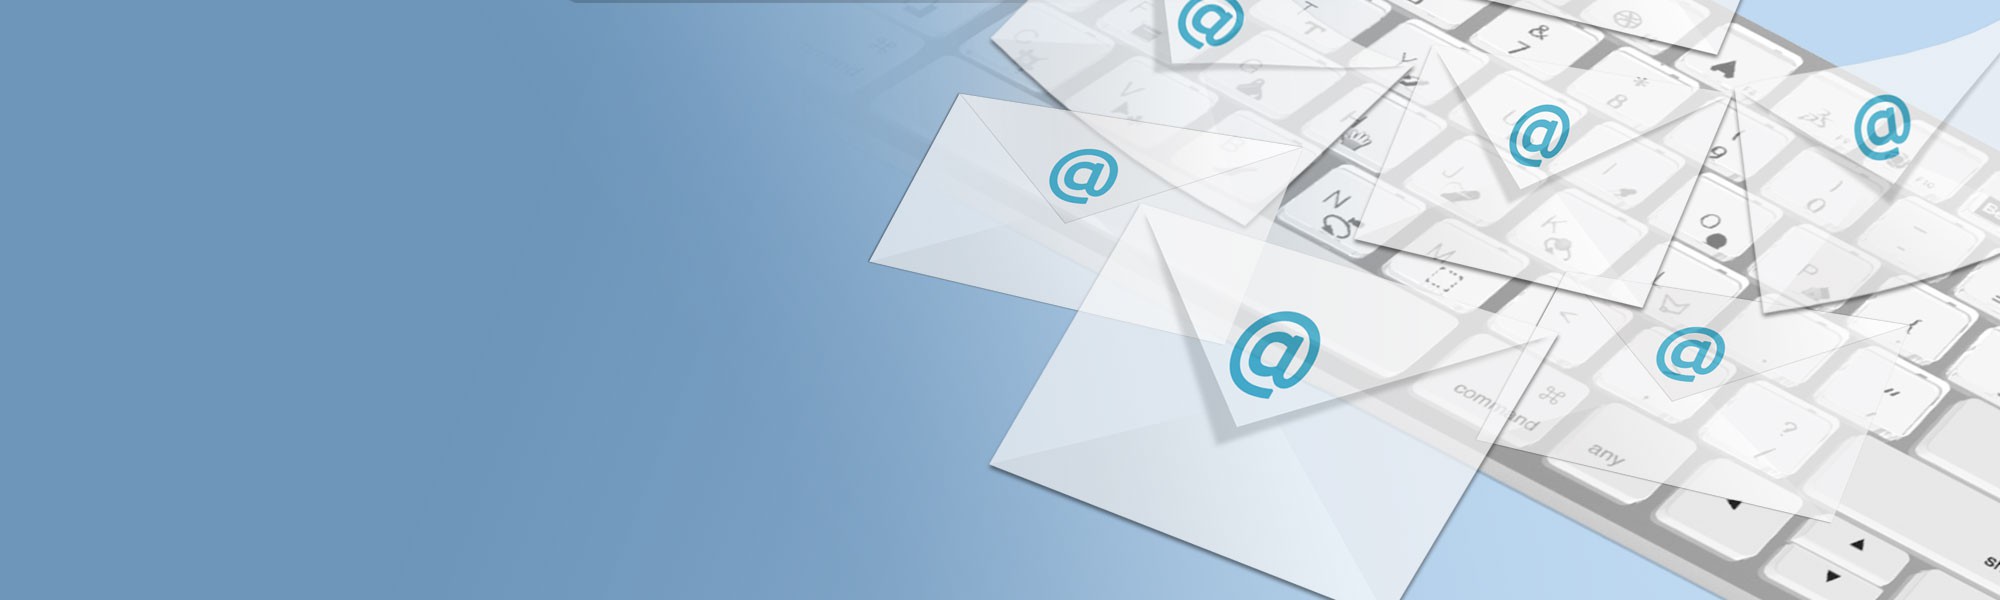 Successful email marketing campaign for any kind of web business!